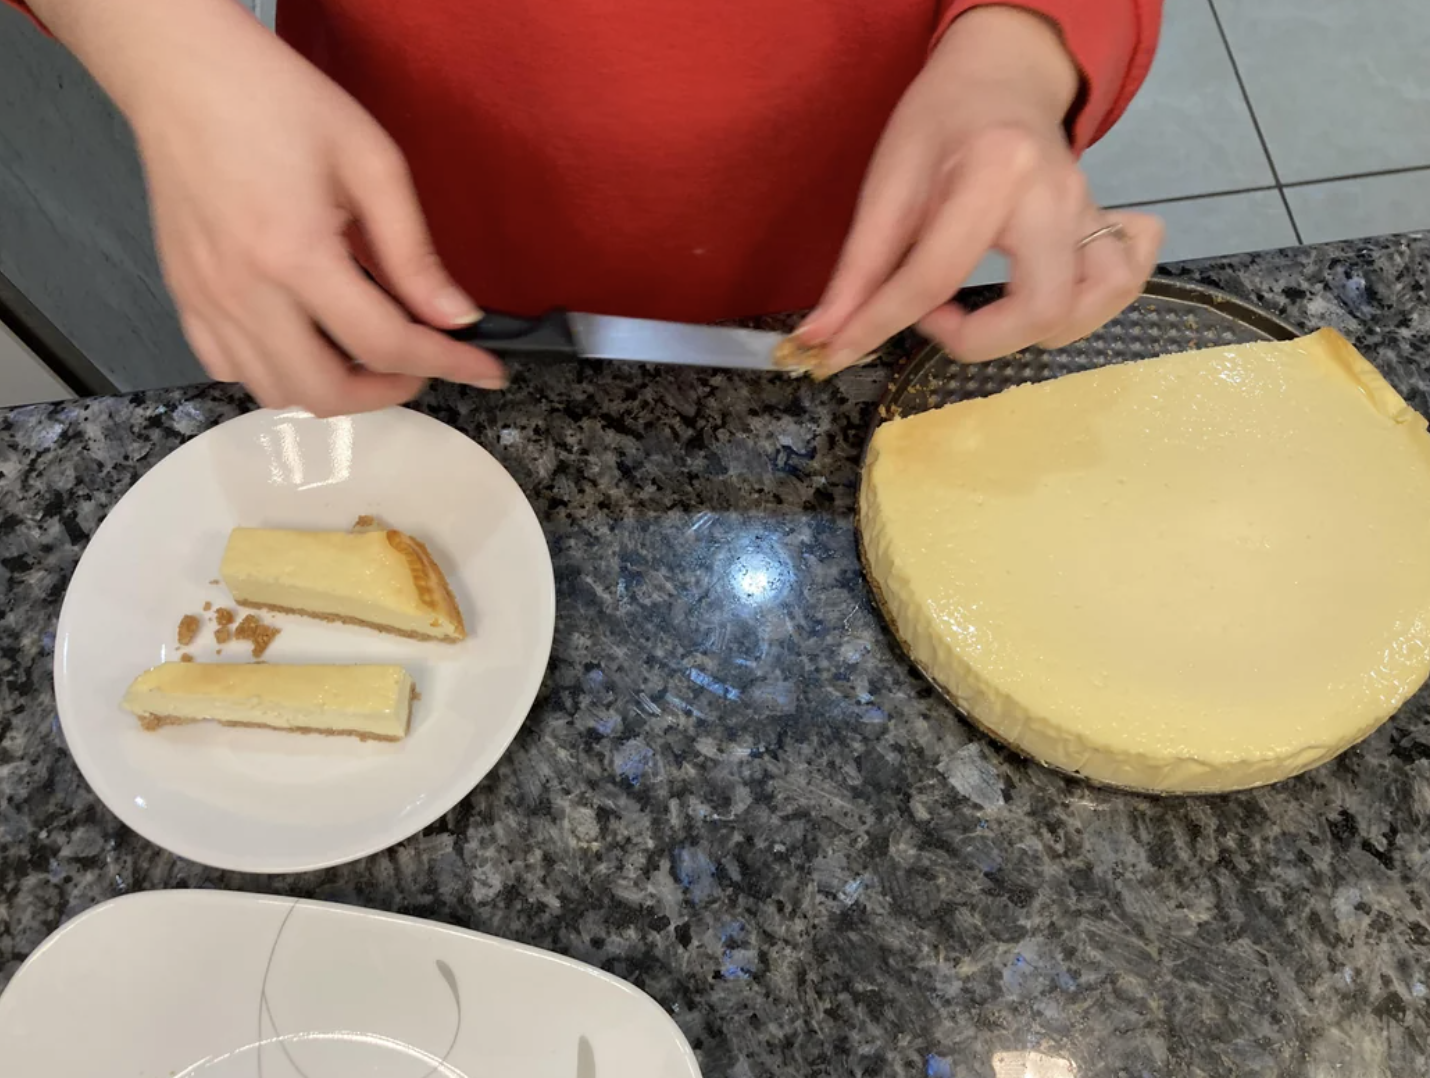 Person slicing a cheesecake badly with two pieces on plates nearby